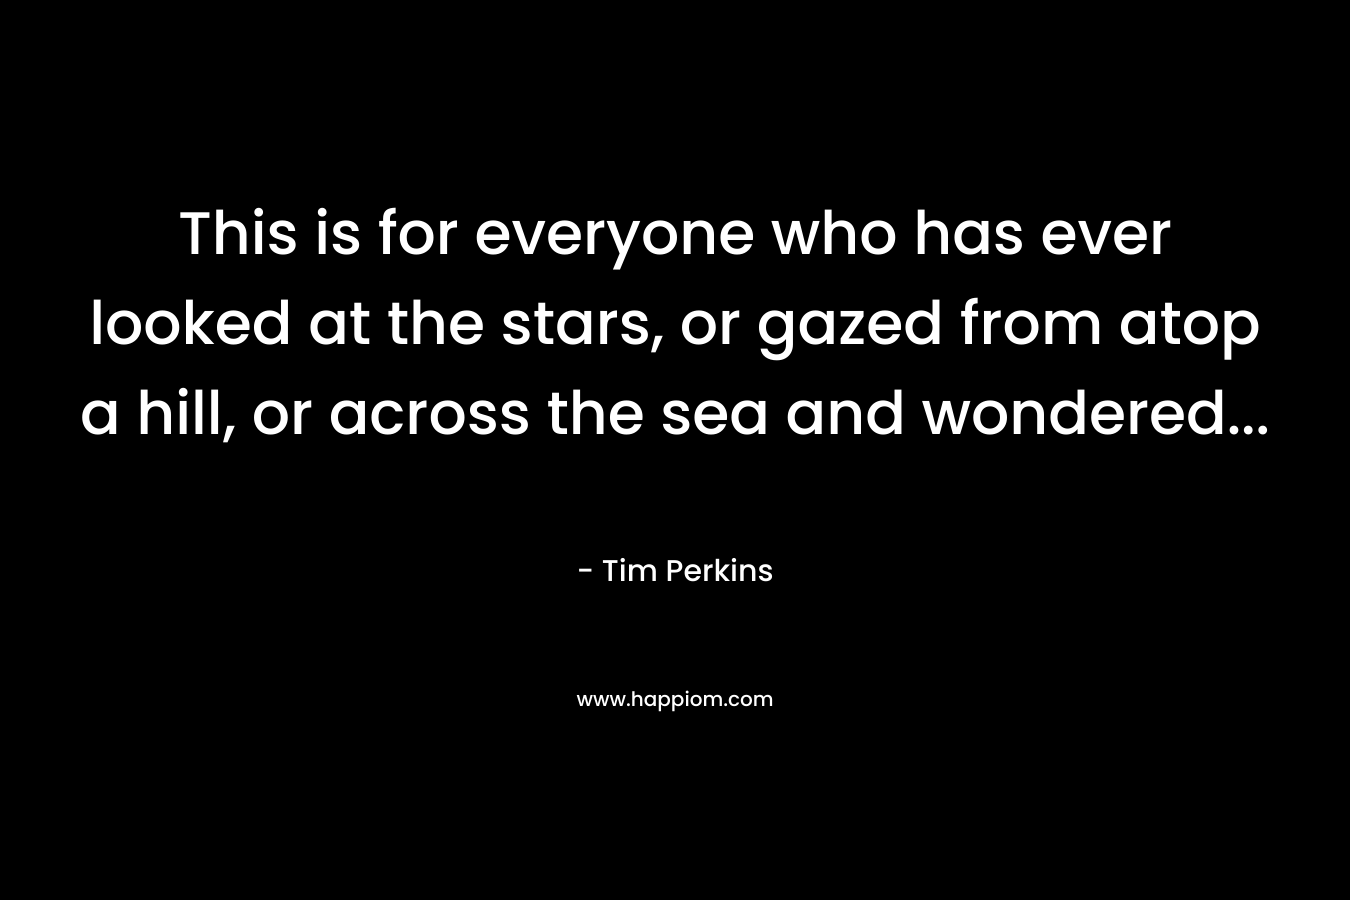 This is for everyone who has ever looked at the stars, or gazed from atop a hill, or across the sea and wondered...